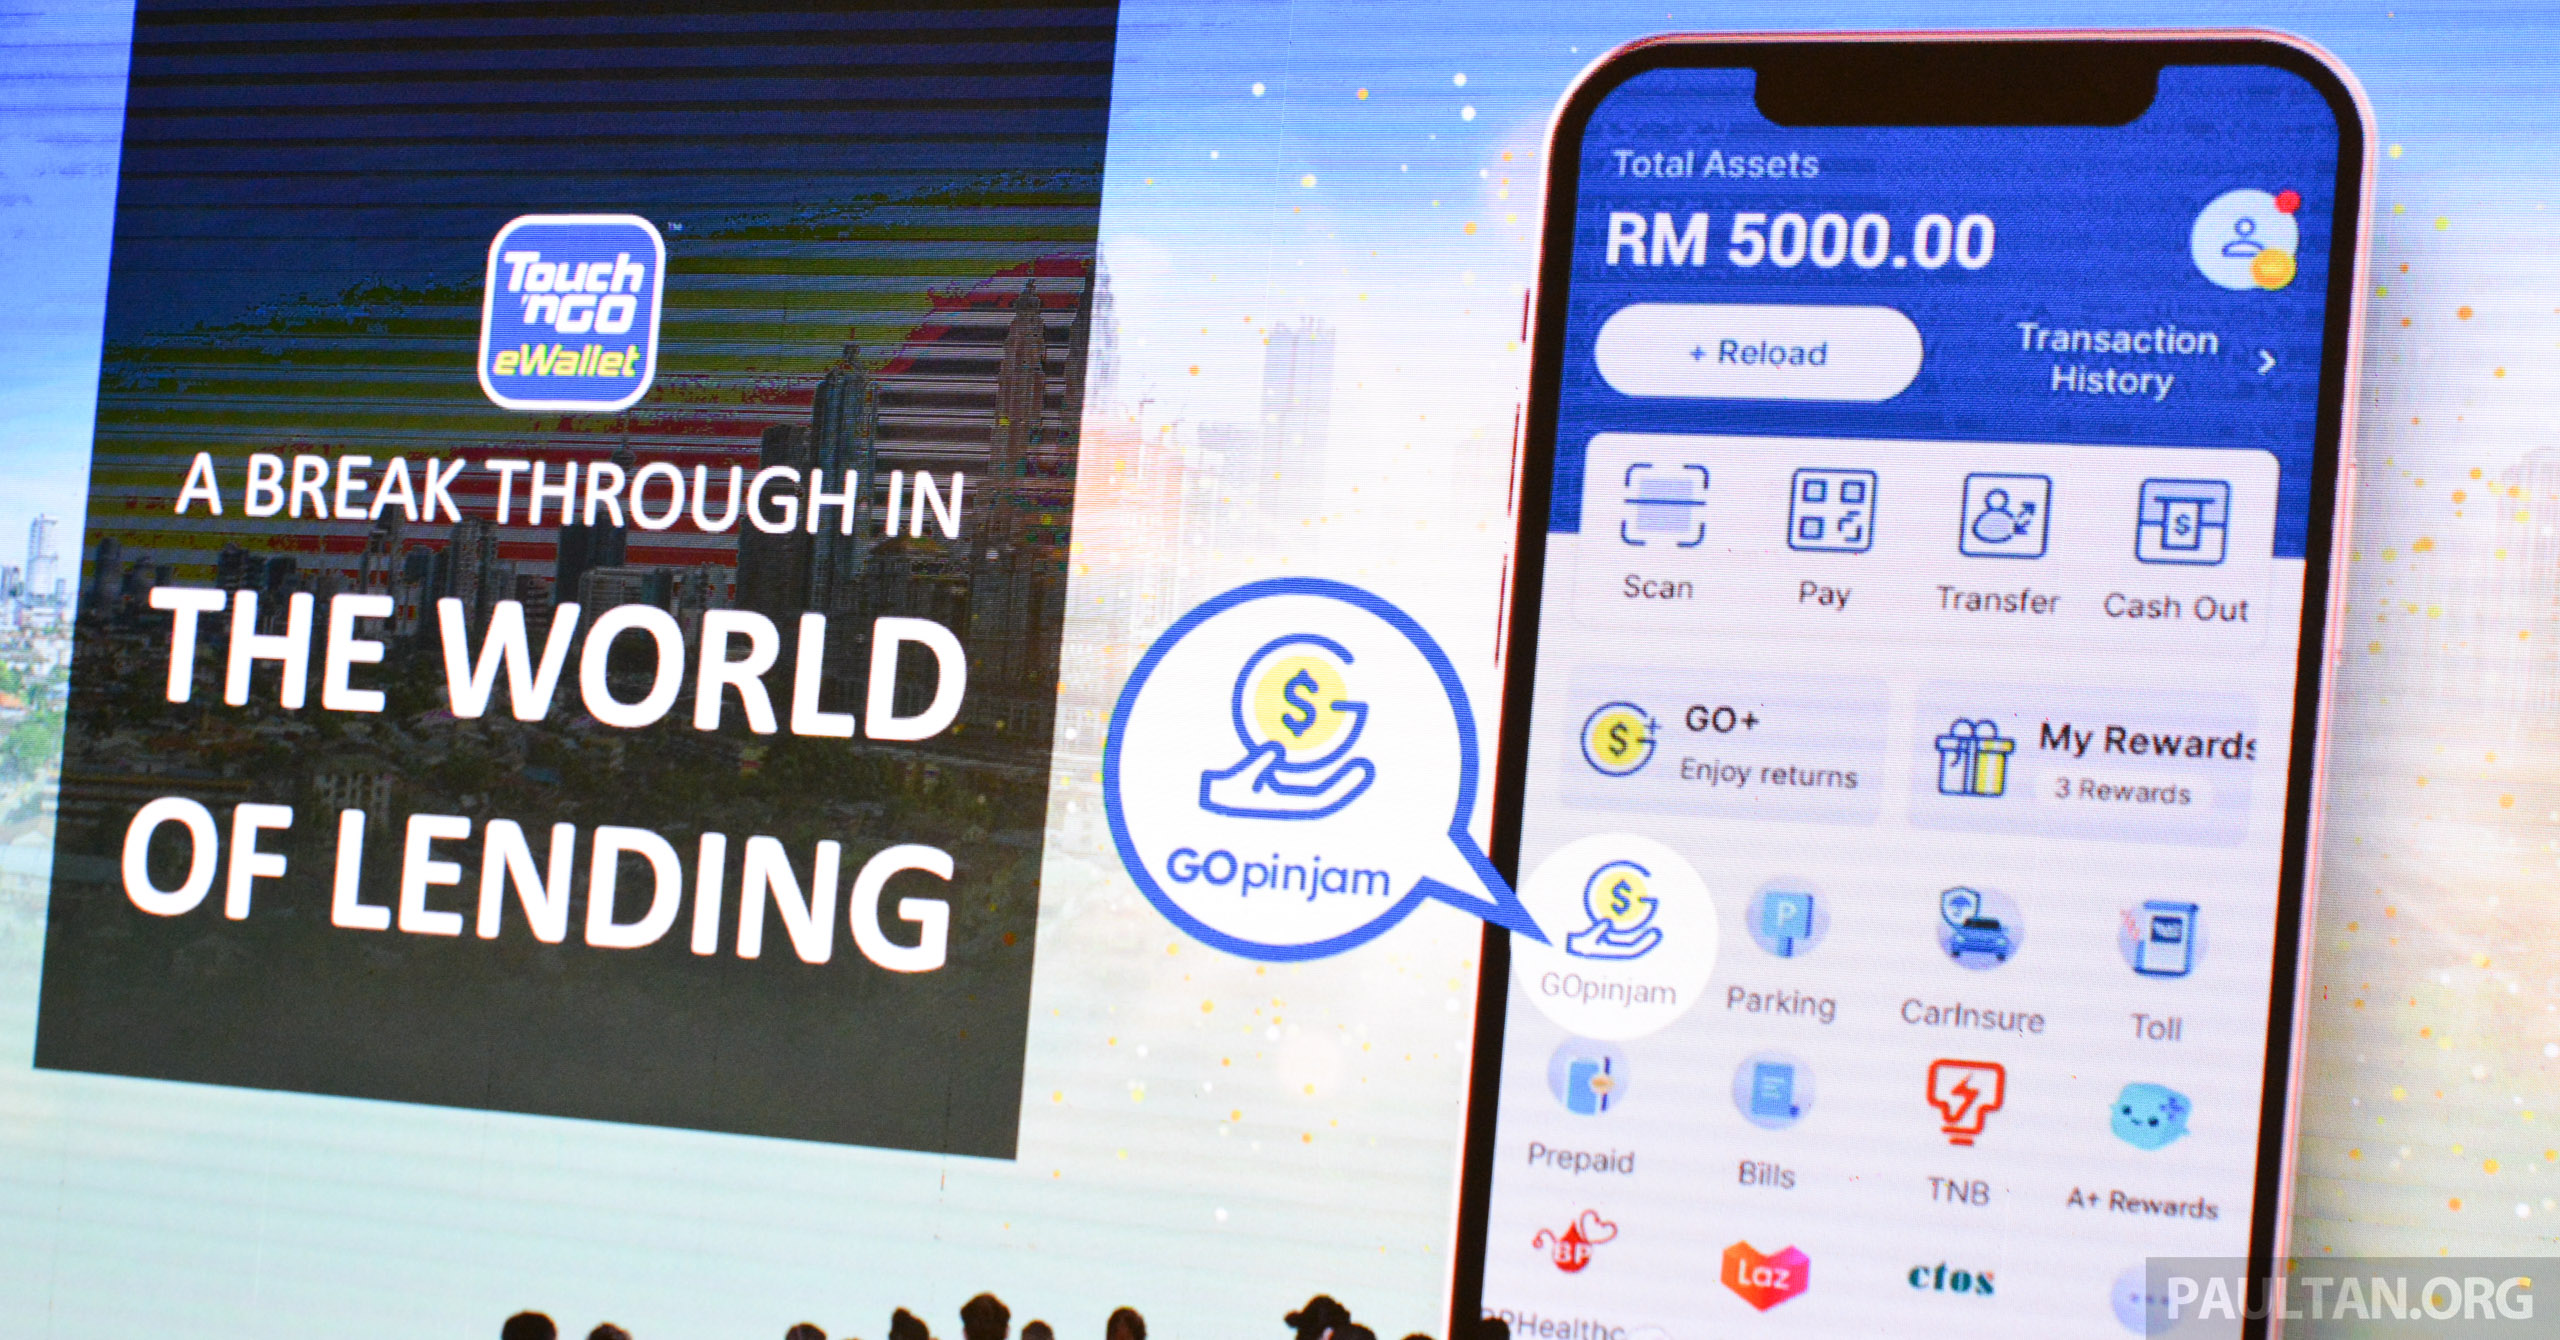 Touch ‘n Go GOpinjam launched in Malaysia – digital personal loans